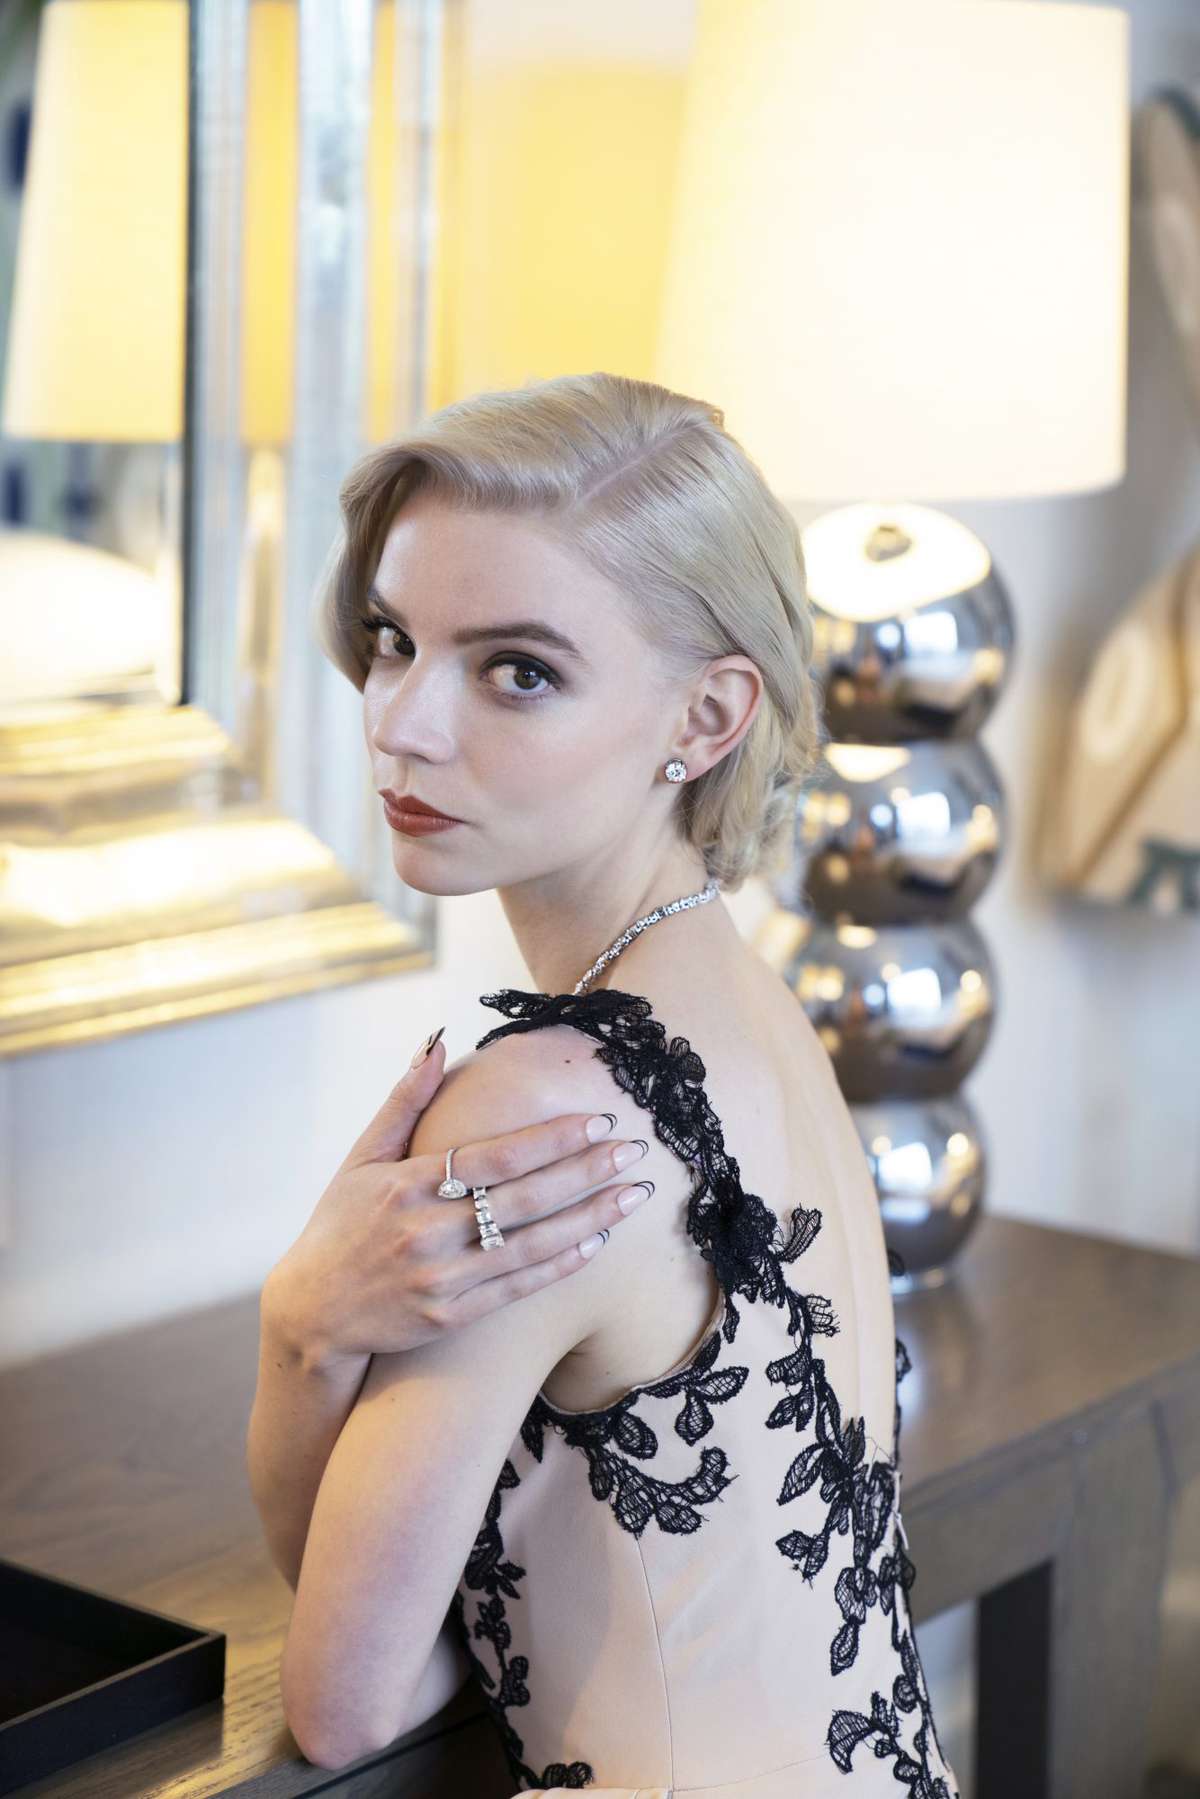 What are some stunning photos of Anya Taylor-Joy? - Quora